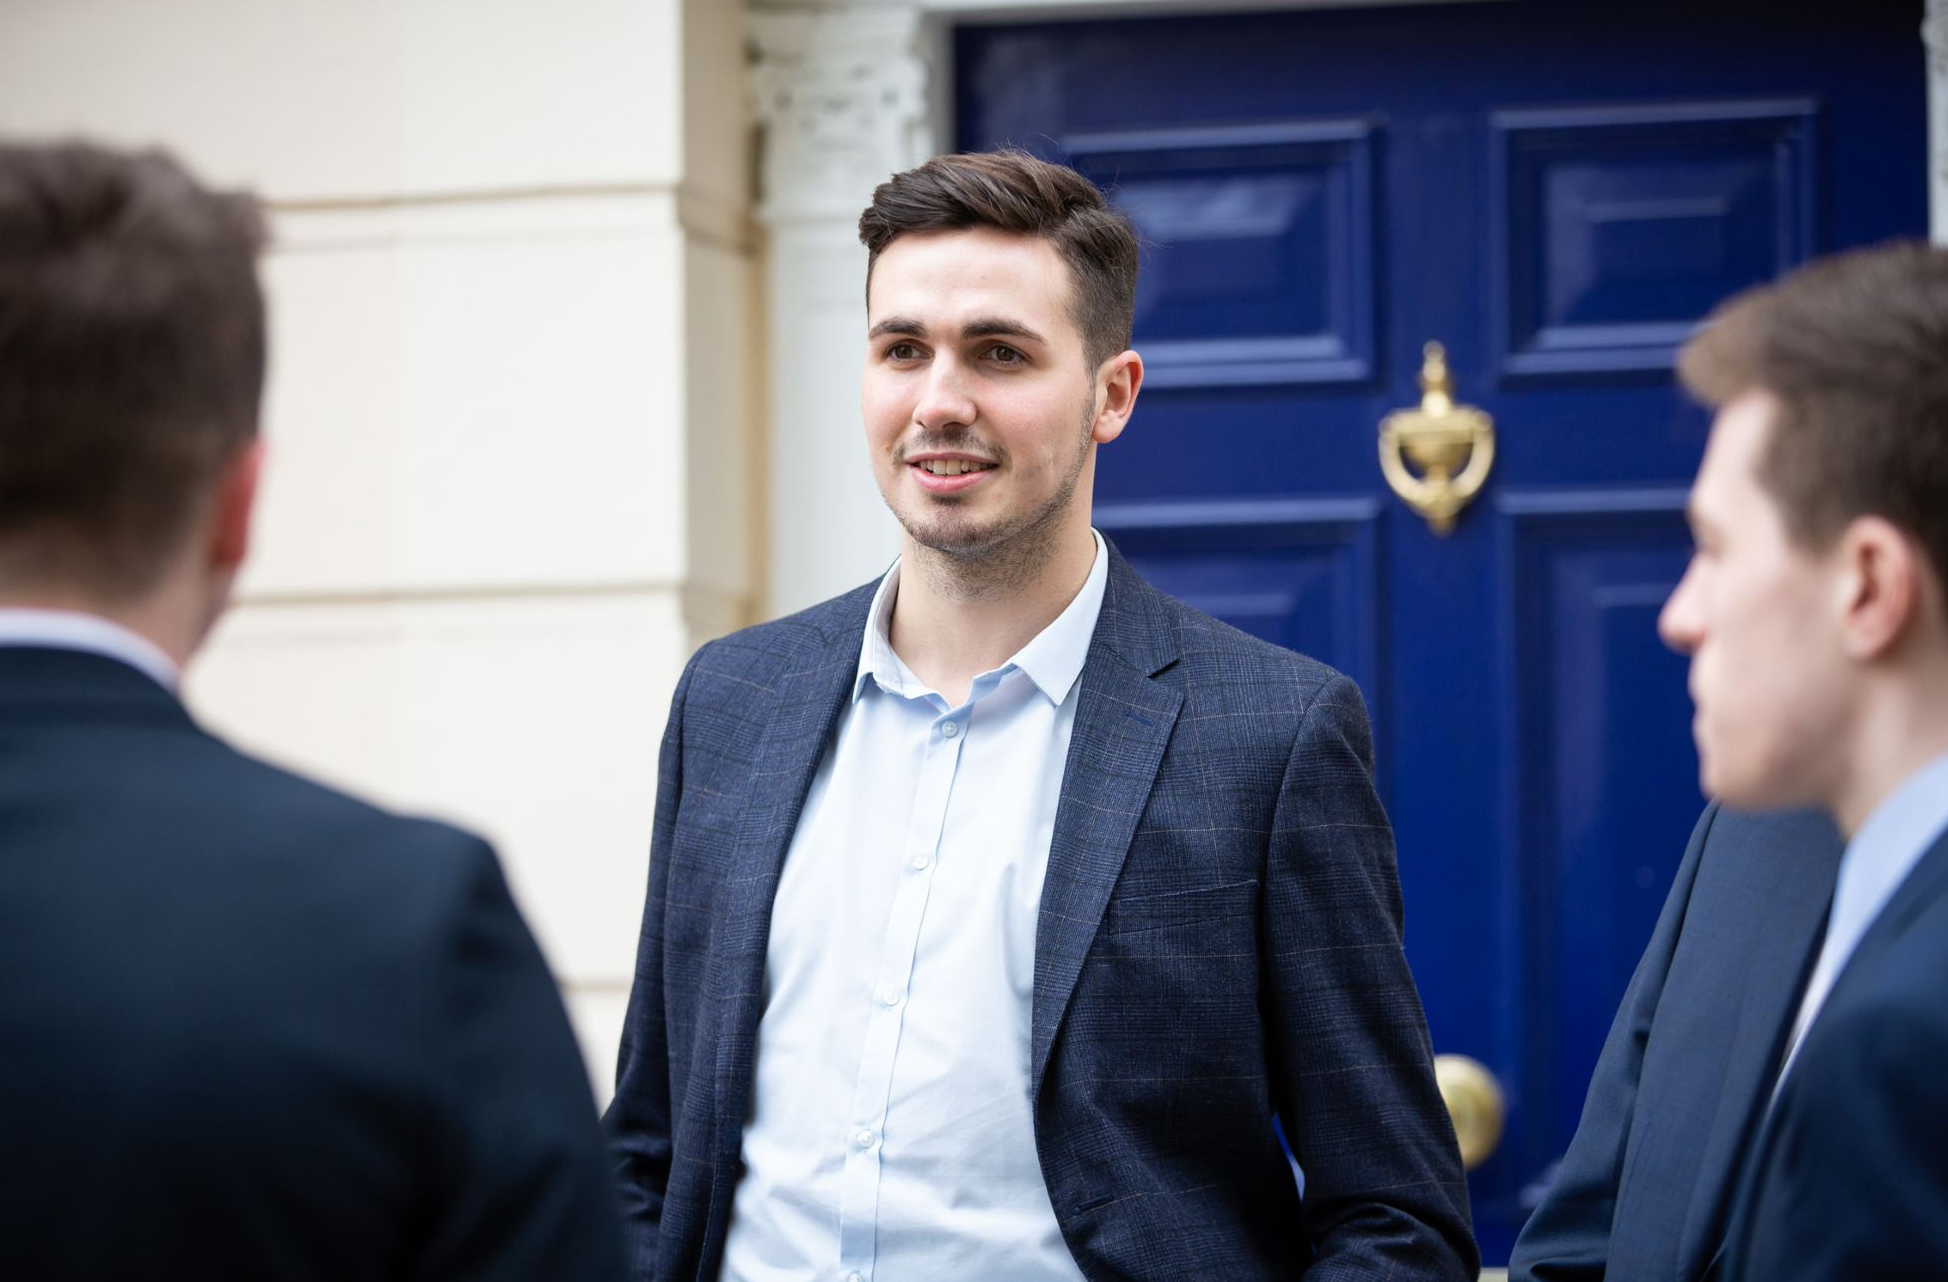 Featured image: Ryan Varney outside the office. - Read full post: From apprentice to project manager: Ryan Varney earns PRINCE2 and discusses training opportunities at Fitzrovia IT